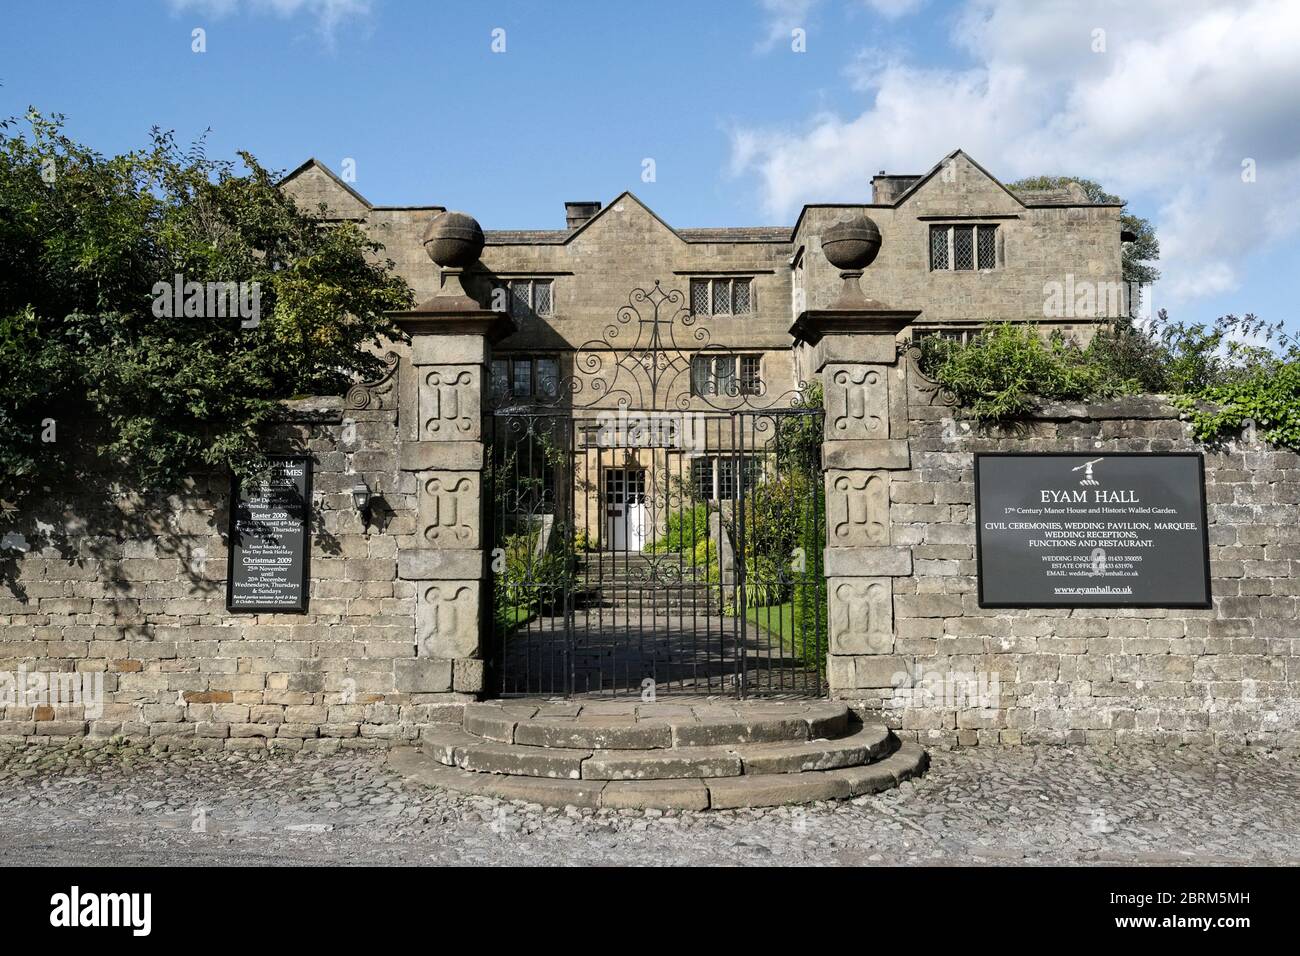 Eyam Hall in the Peak District, Derbyshire England UK, Jacobian styled historic, grade 2 listed building. Stock Photo